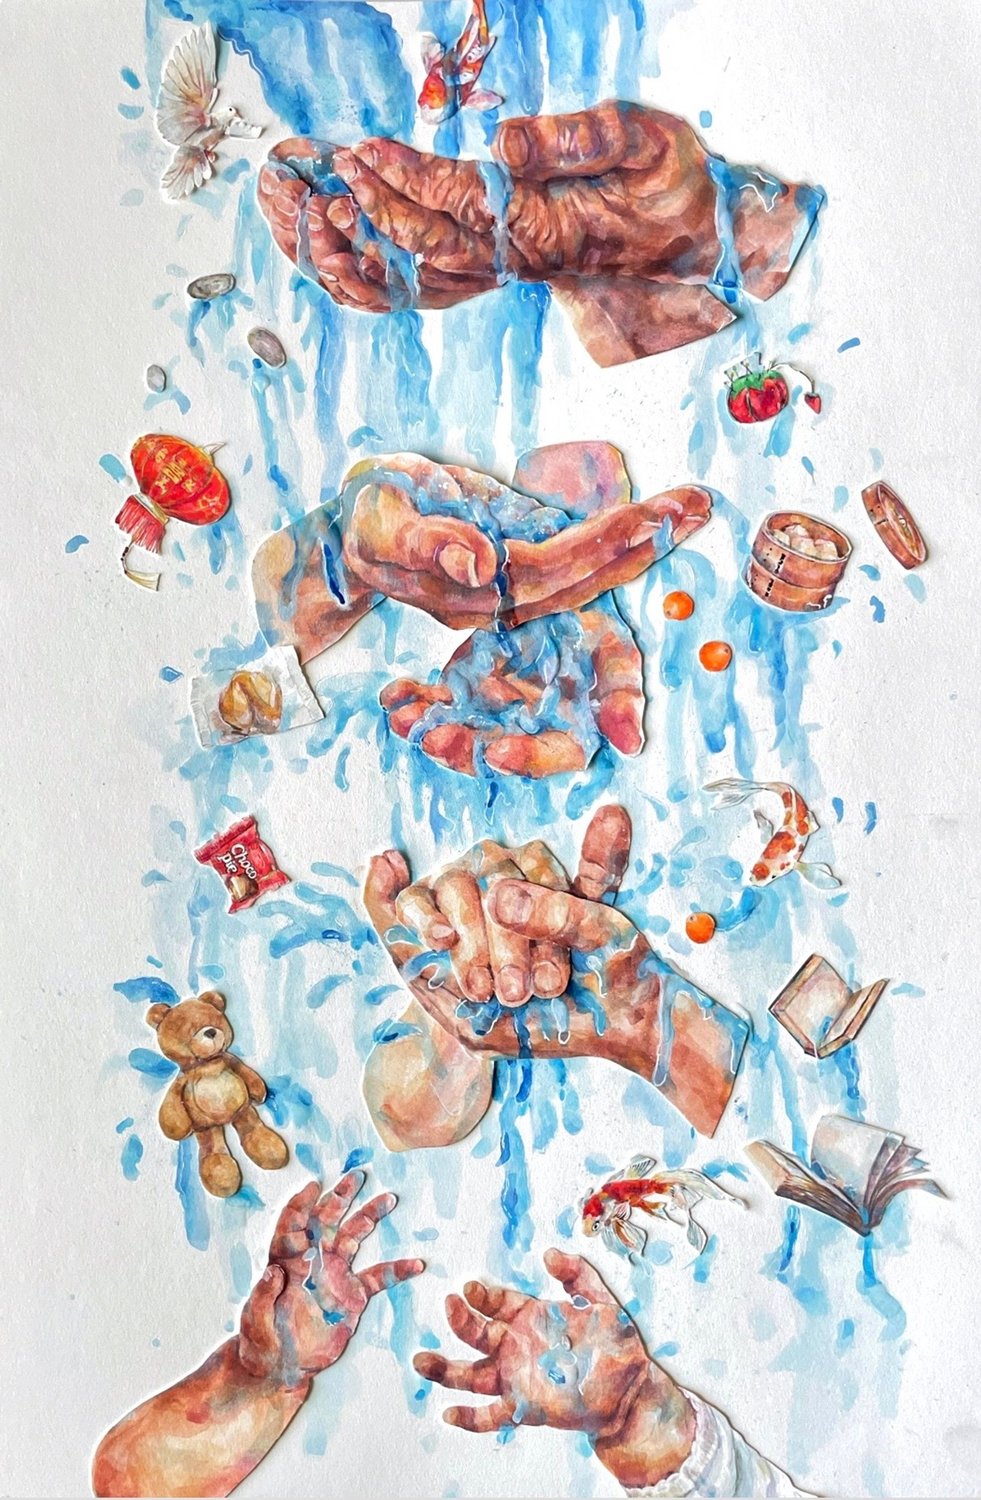 This artwork by Tompkins High graduate Zoe Puno, called Waterfall Effect, was recently featured on the Expressions Challenge, an arts program to connect, inspire and empower youth to share their perspectives on life through the arts.